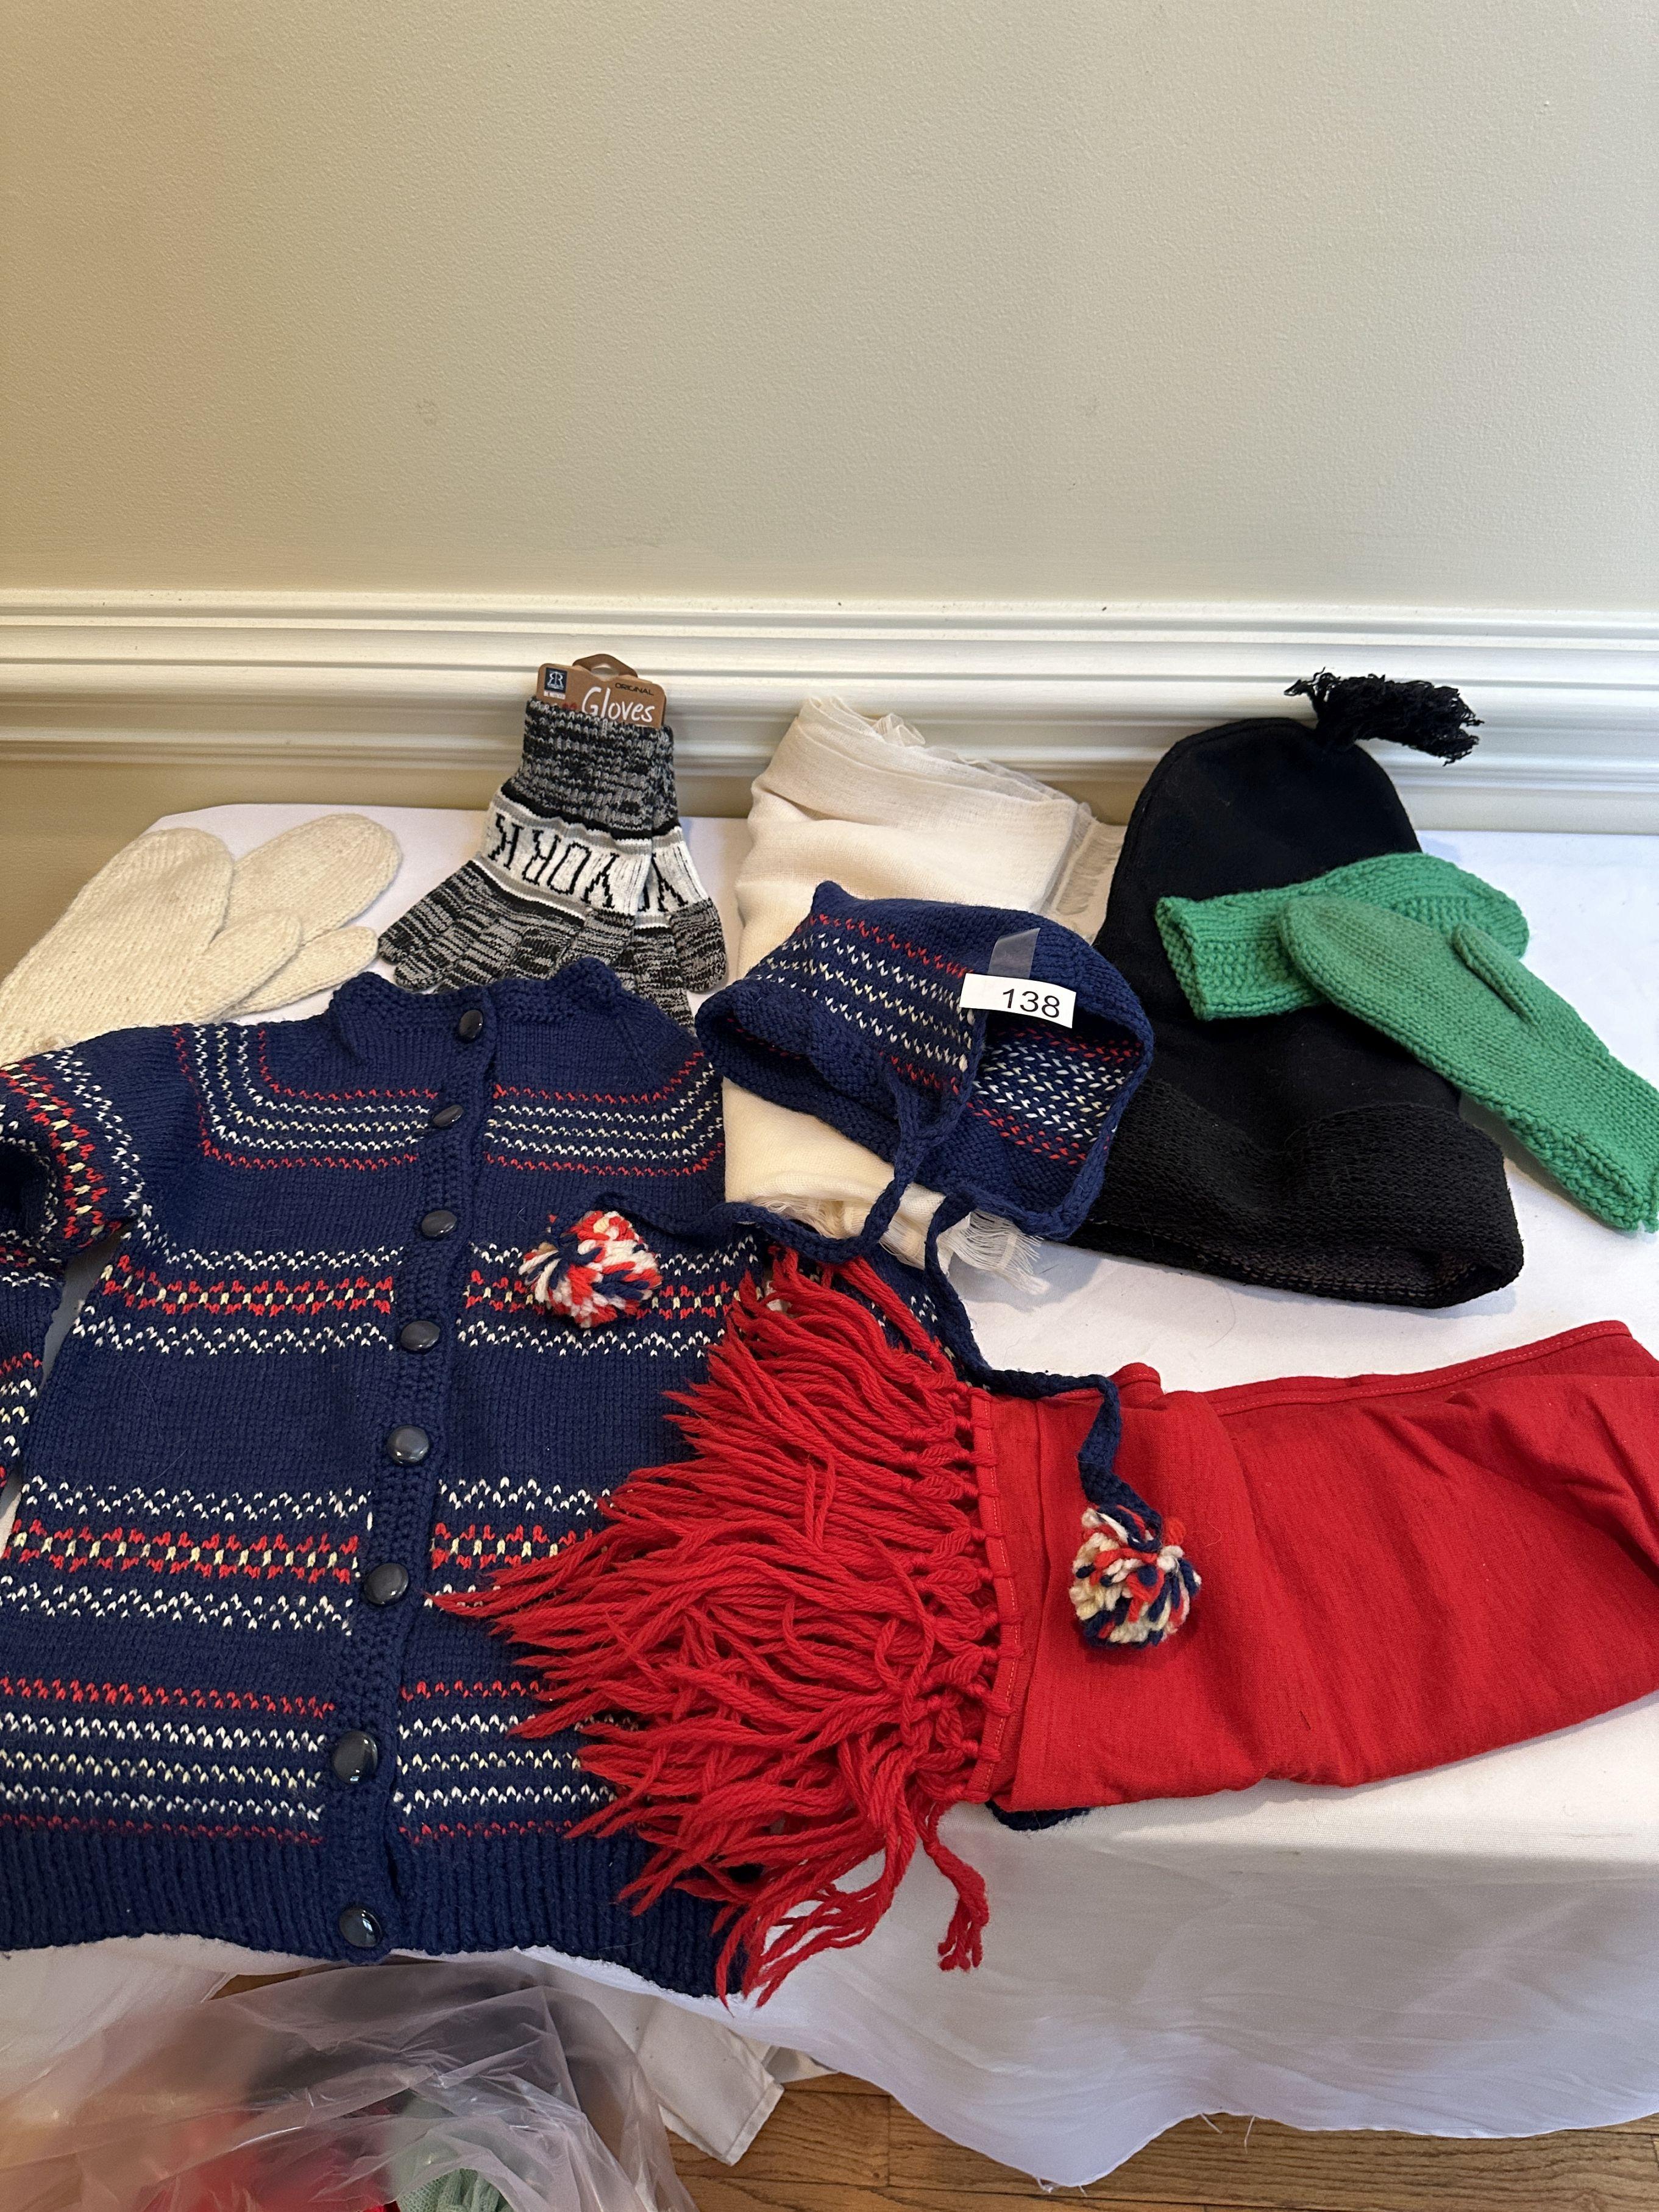 Box Lot/Vintage Toddler/Kids Clothes, Gloves, Caps (Some Seem Hand Made)